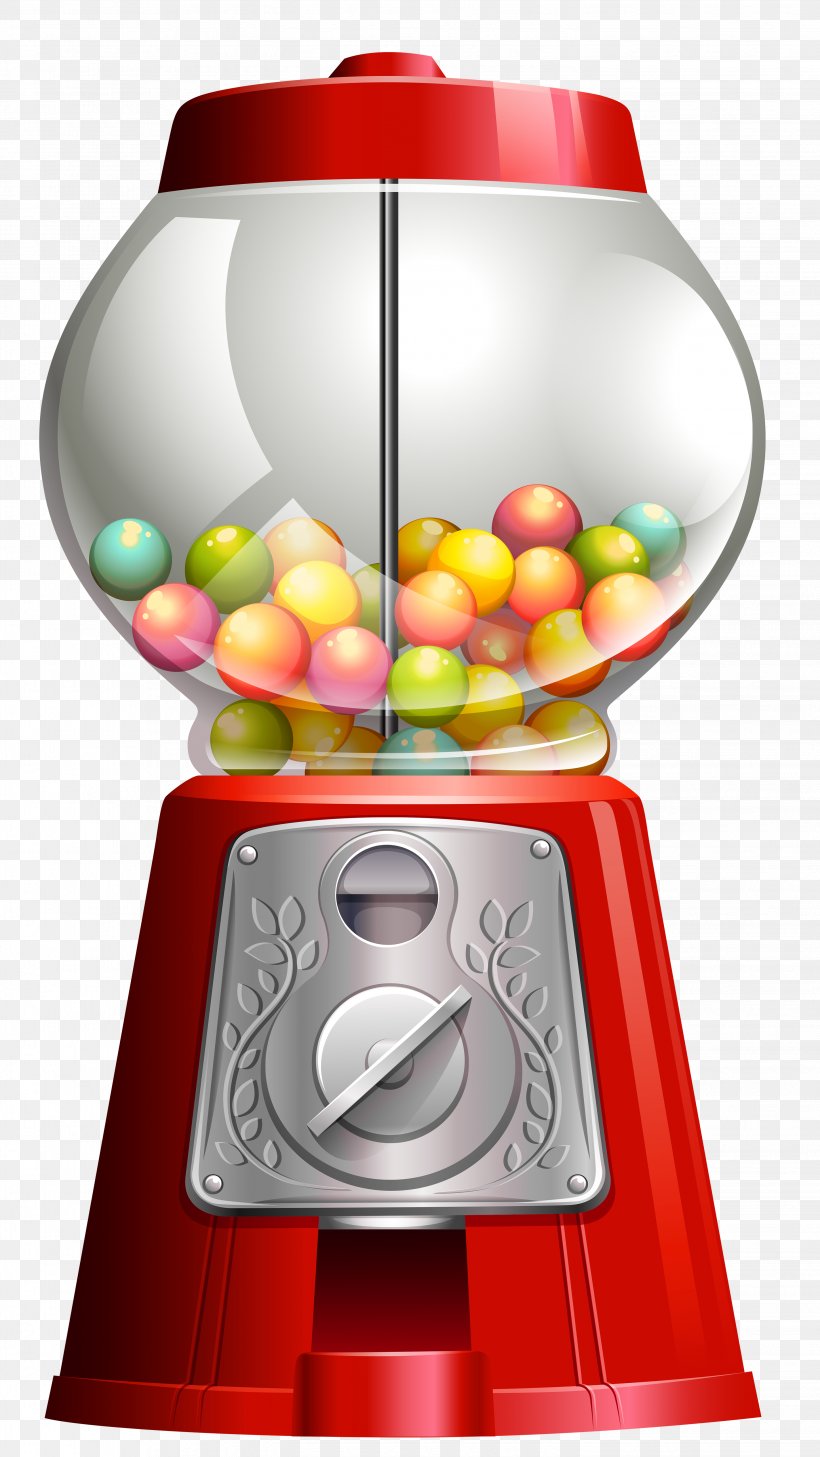 Chewing Gum Cotton Candy Gumball Machine Vending Machines, PNG, 2891x5138px, Chewing Gum, Bubble Gum, Candy, Confectionery, Cotton Candy Download Free